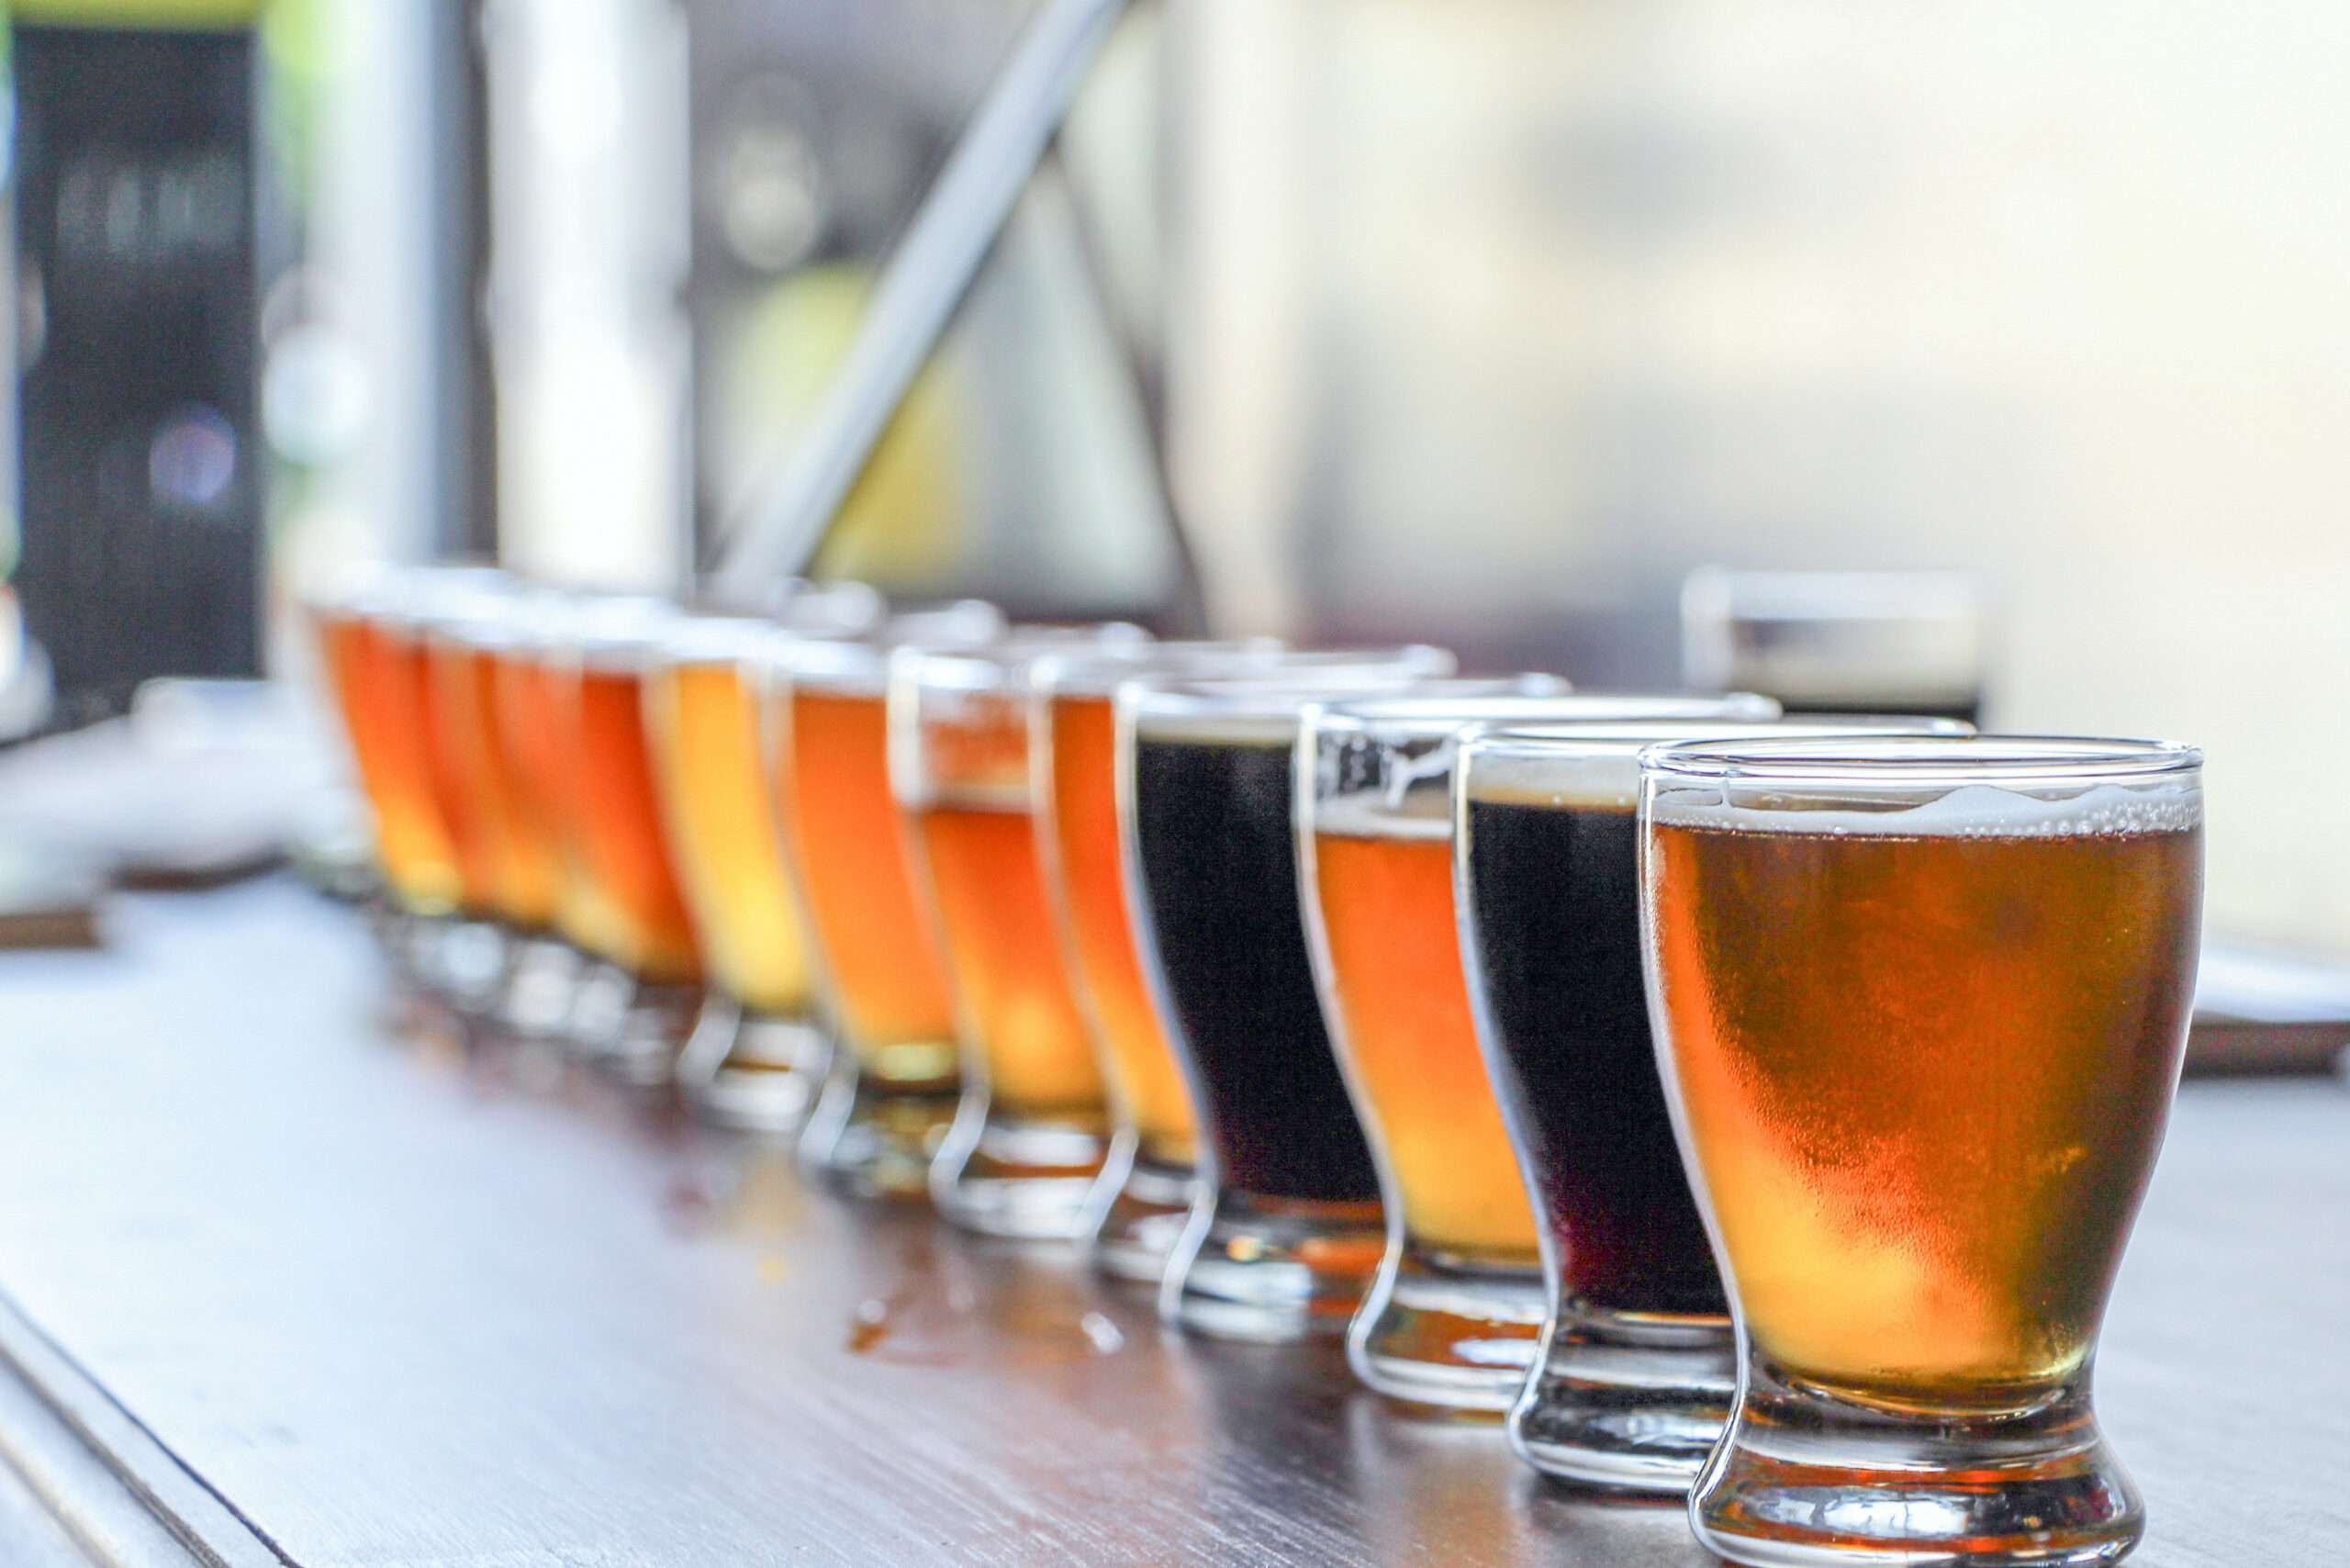 New Jersey brewery sues state over outrageous restrictions